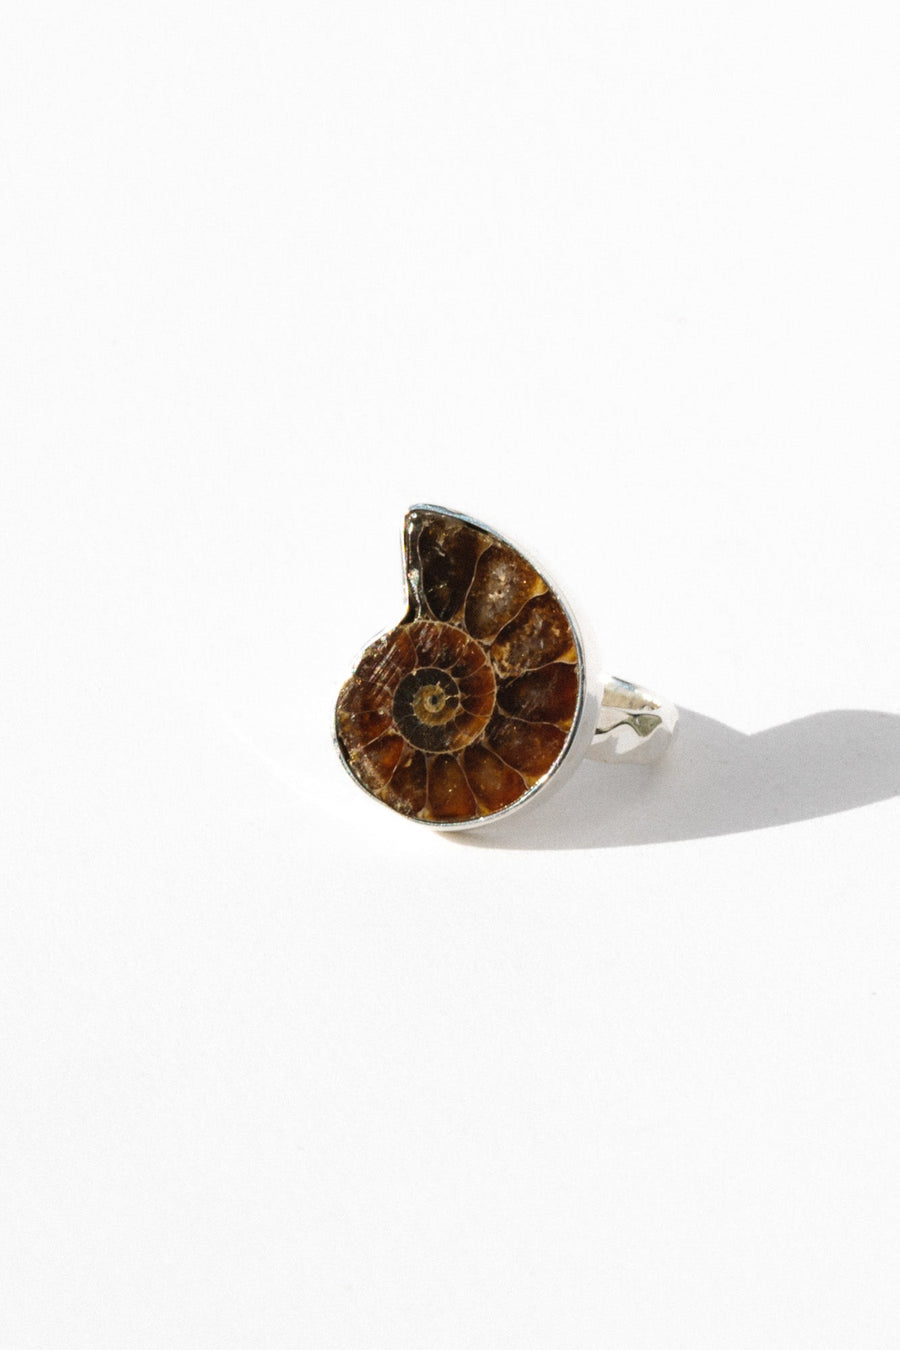 Starborn Creations Jewelry Silver / Open Size Sacred Spiral Ammonite Ring